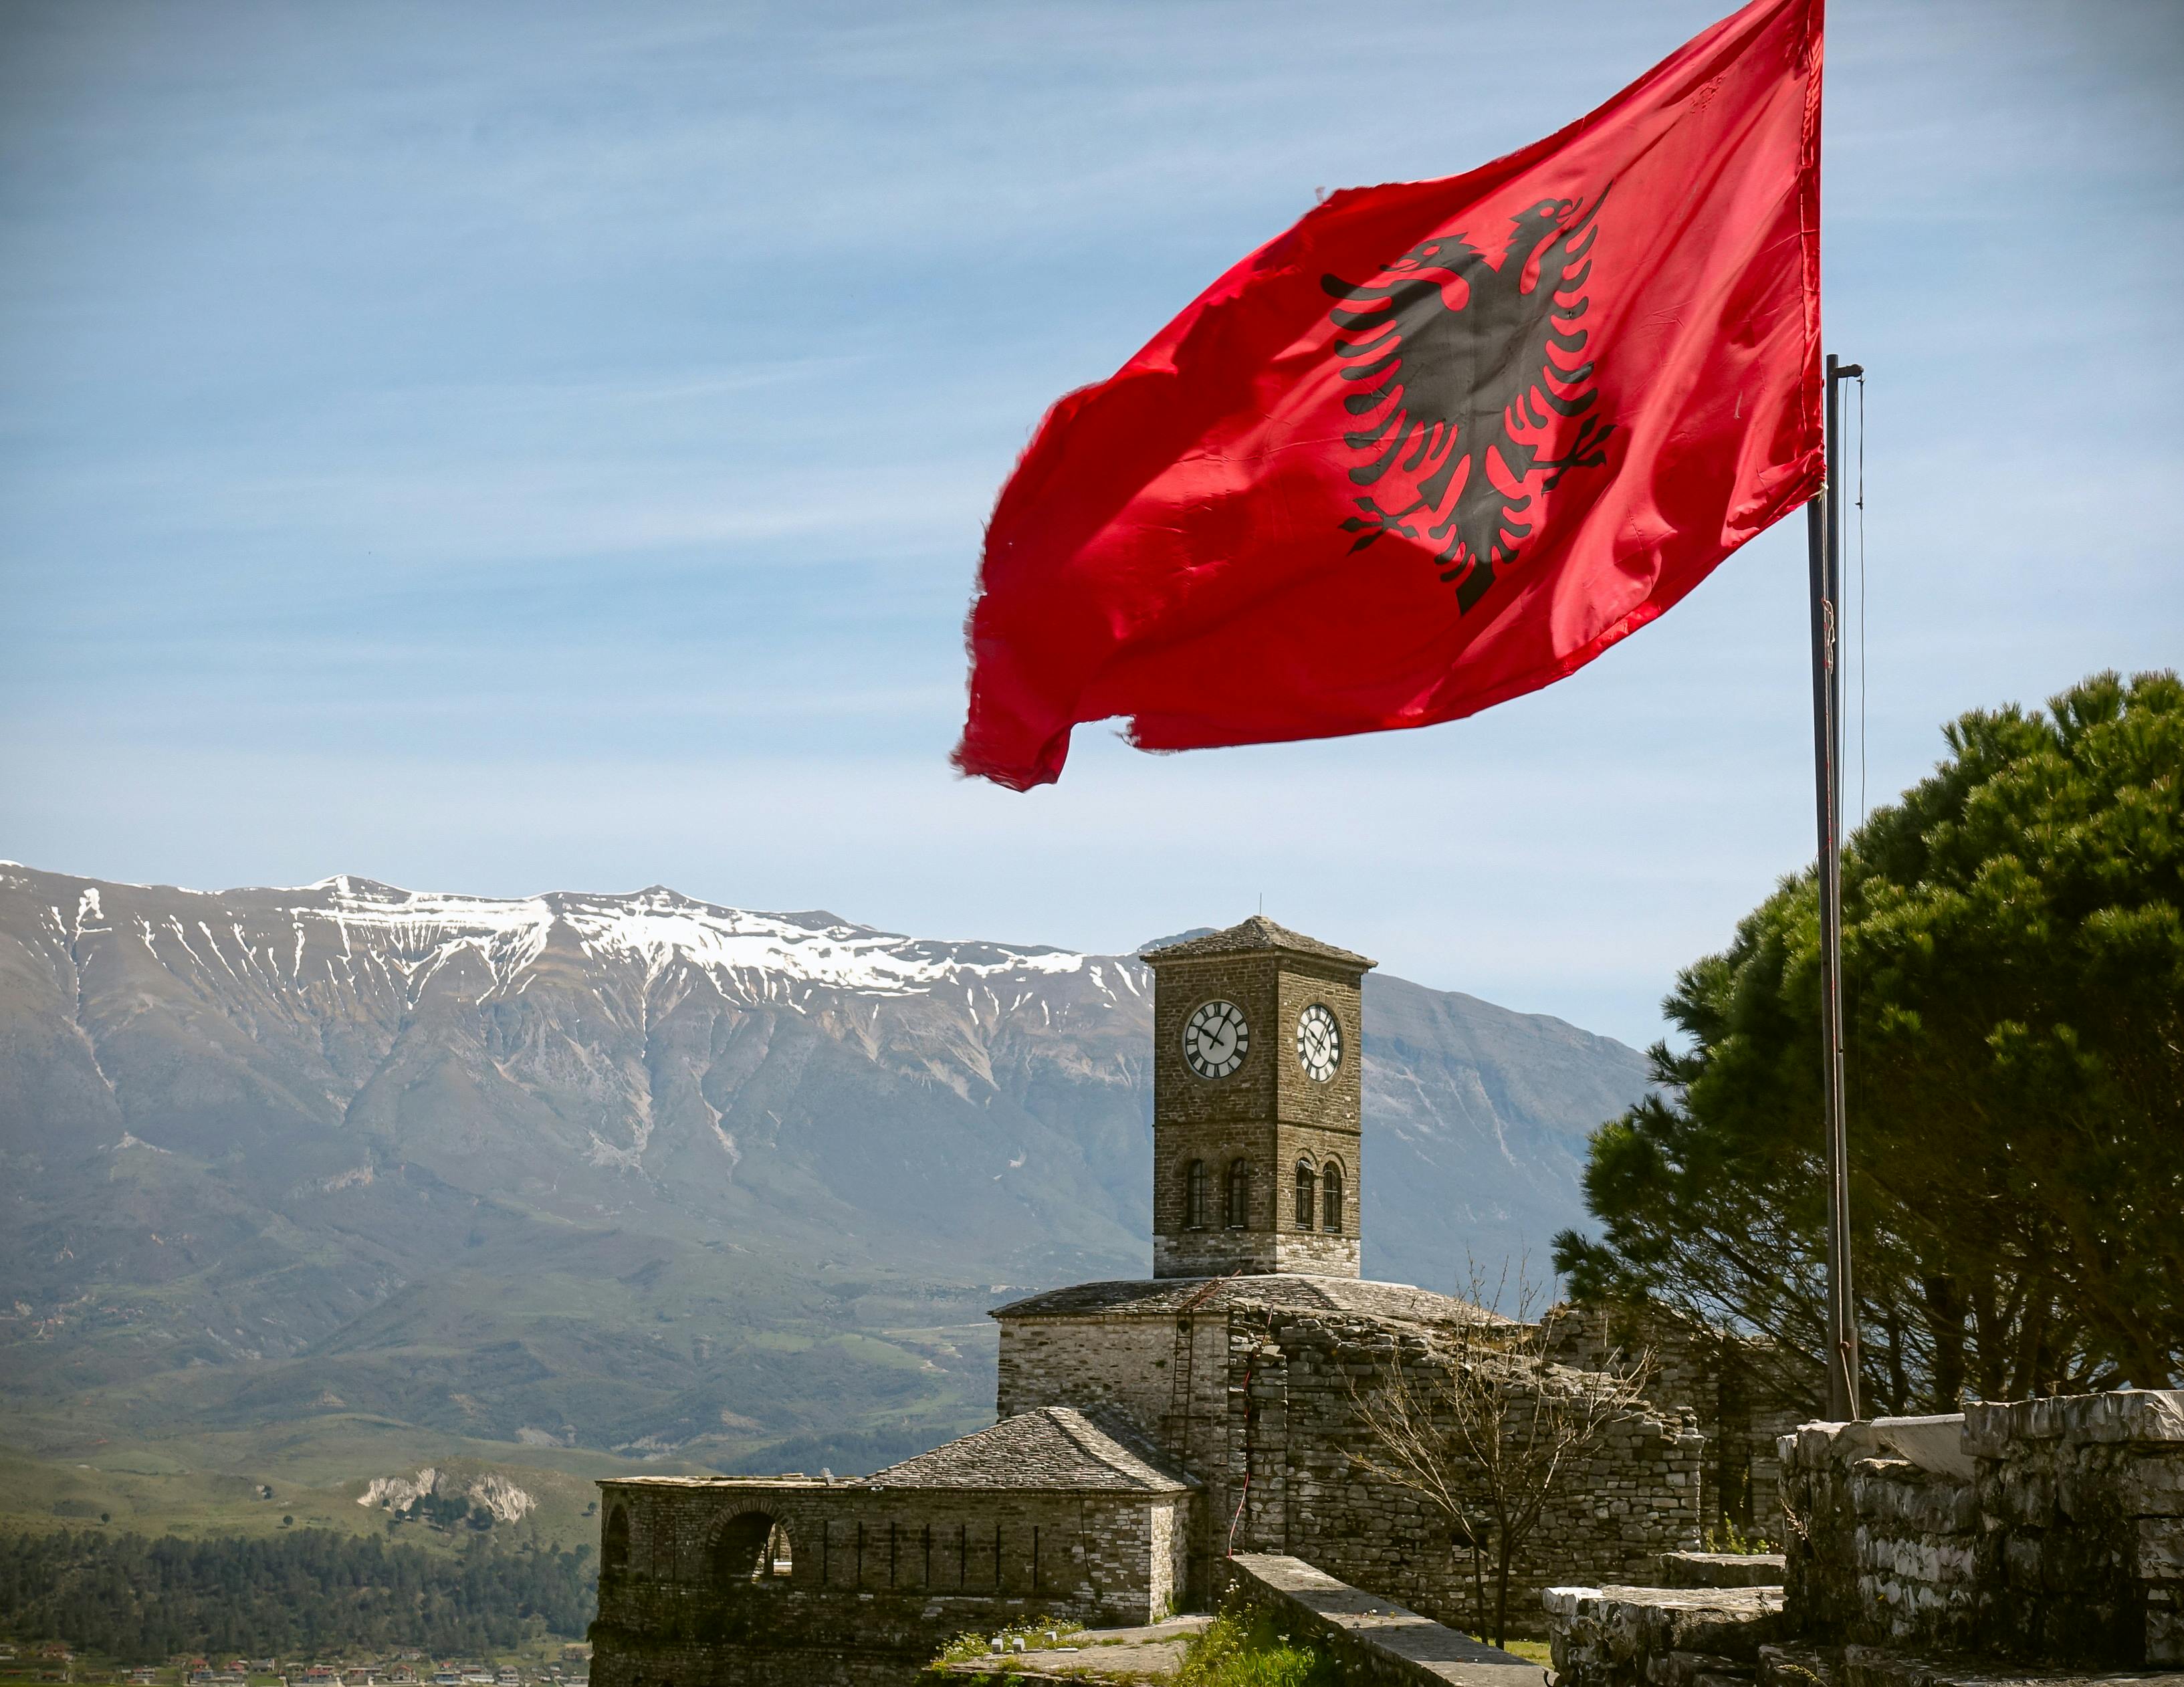 View of the Albanian flag and the Gjirokaster Fortress. Credit: Oscar M via Pexels.